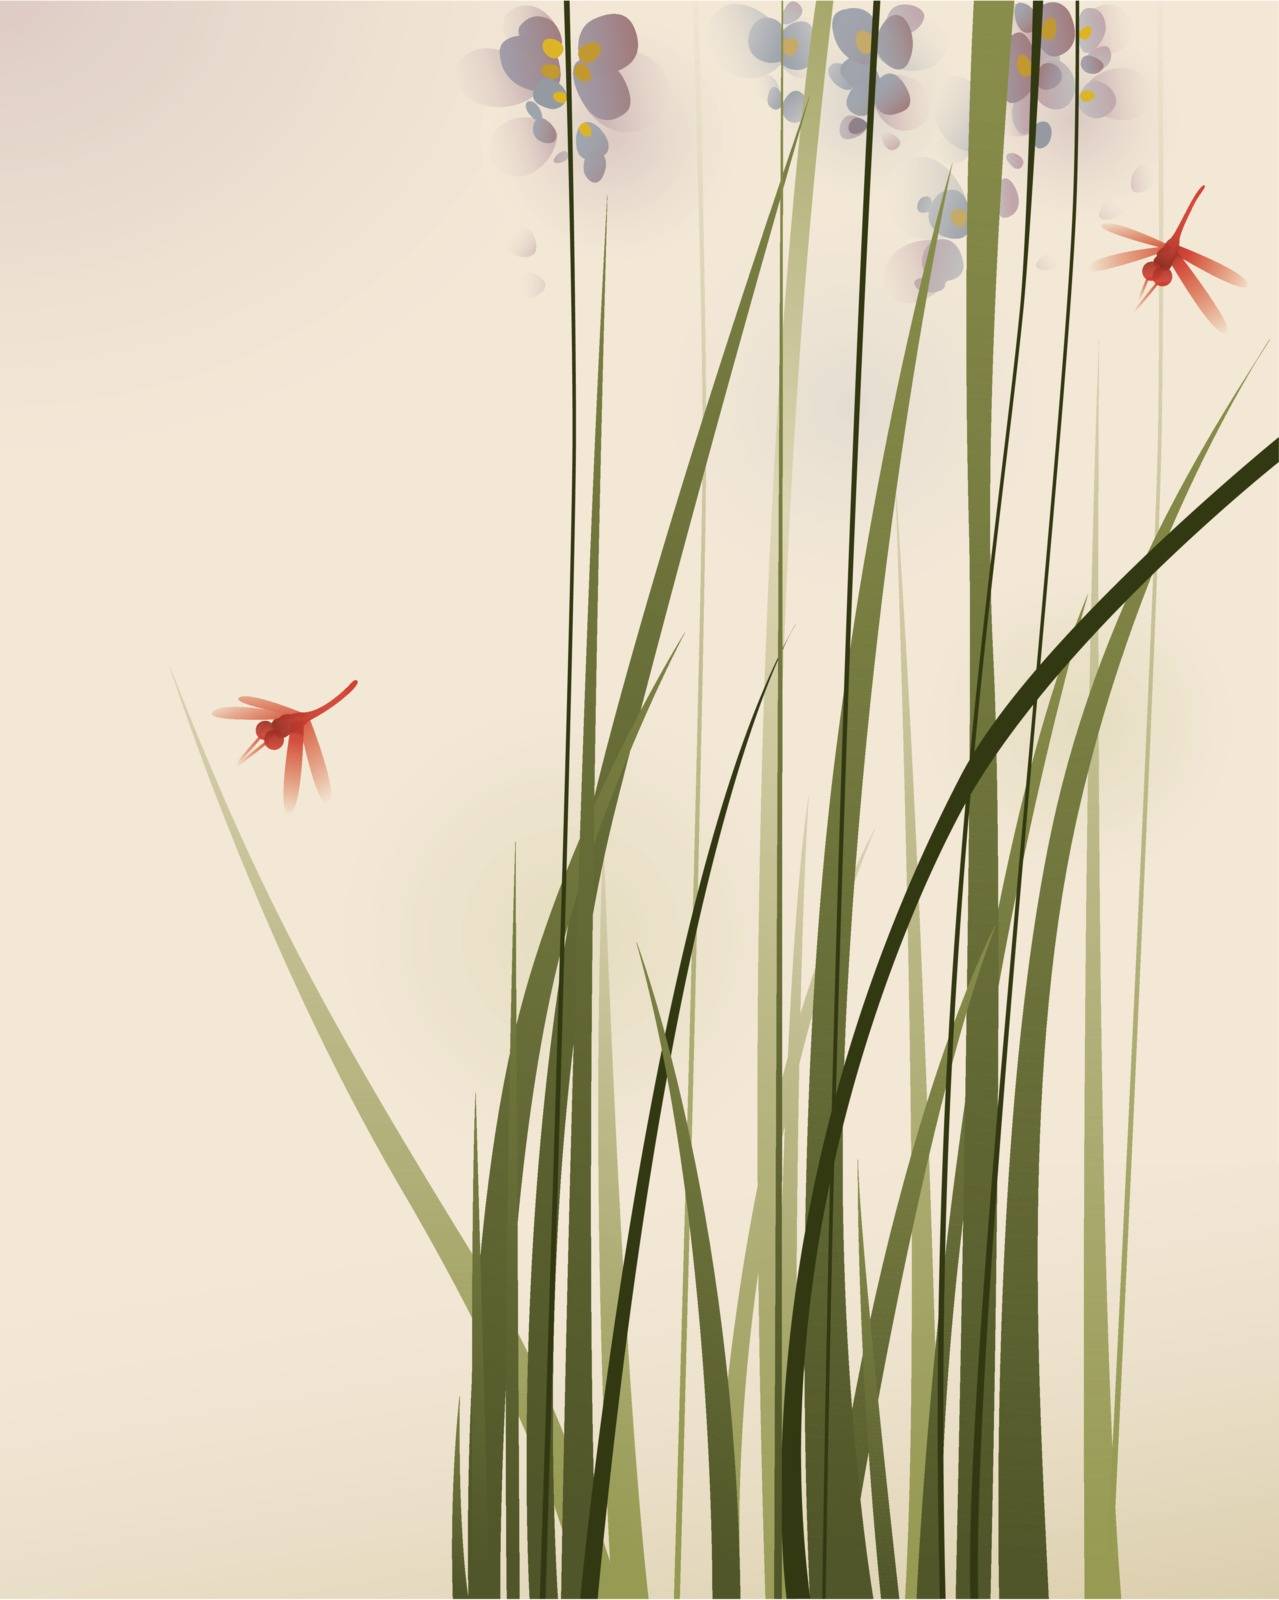 Flowers and dragonflies.  Vectorized brush painting.